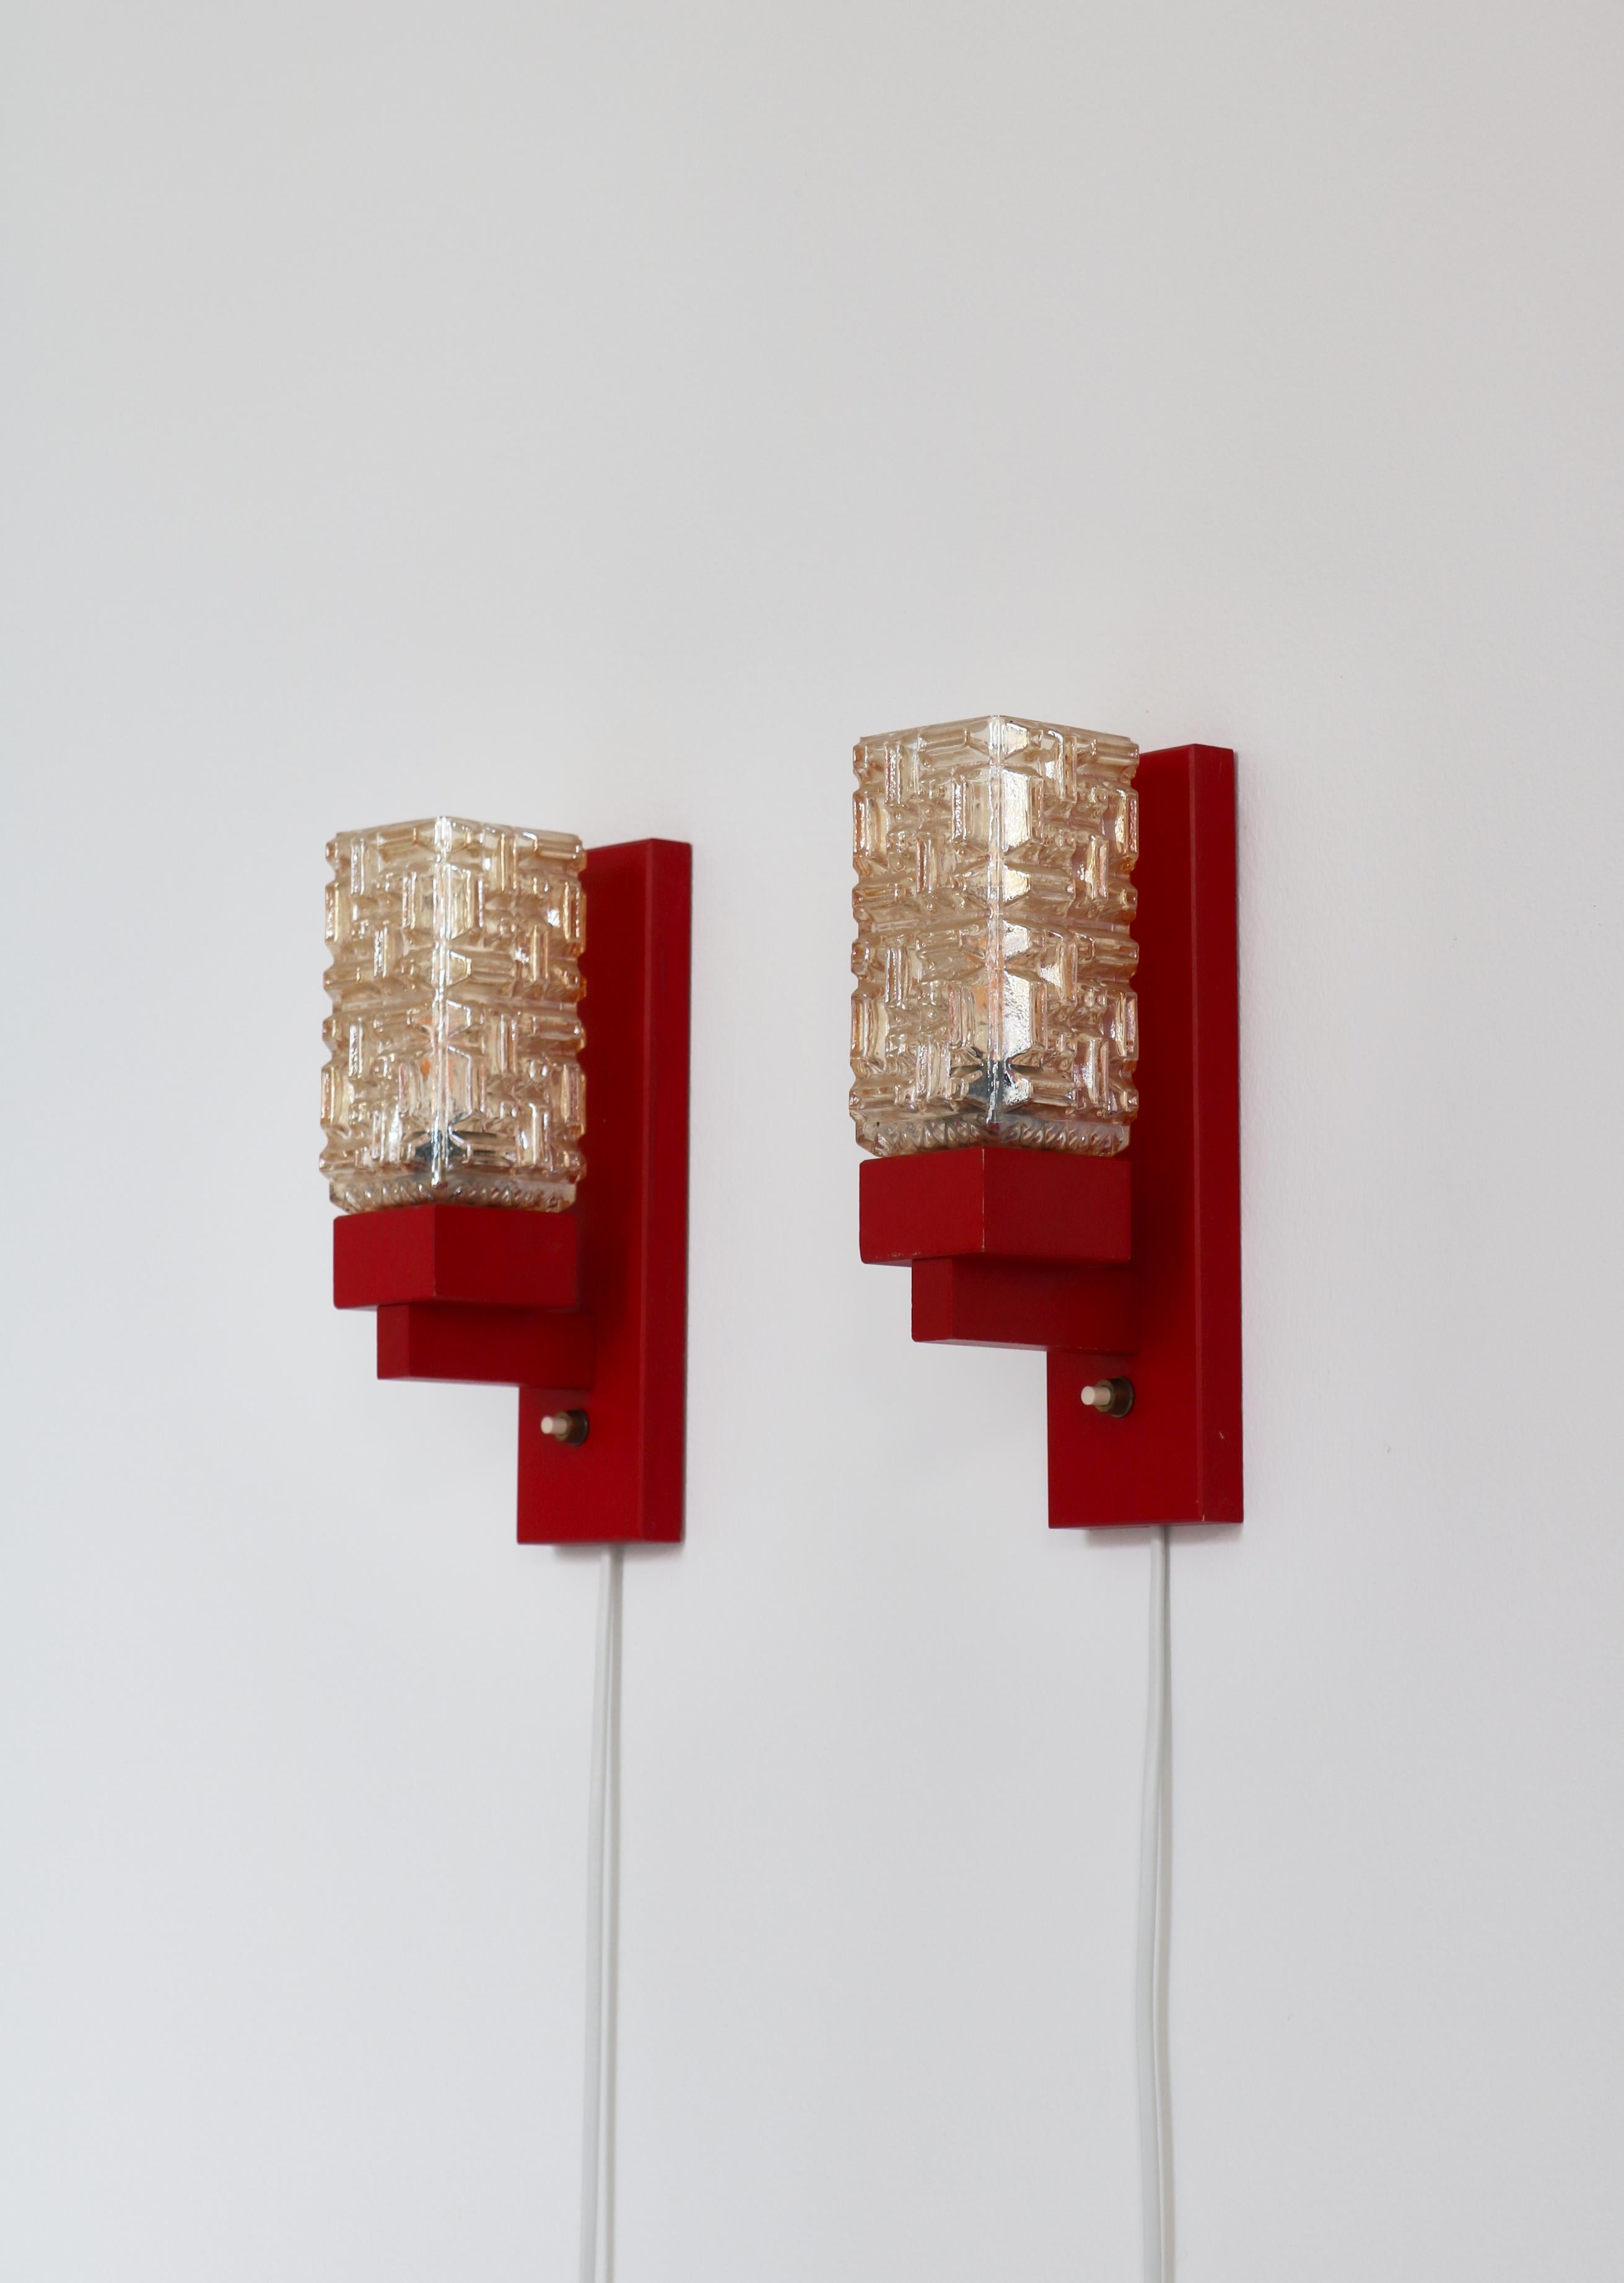 Wonderful set of Danish Modern wall lamps in red lacquered wood and amber colored glass shades. The lamps were made in the 1970s by the small Danish workshop 